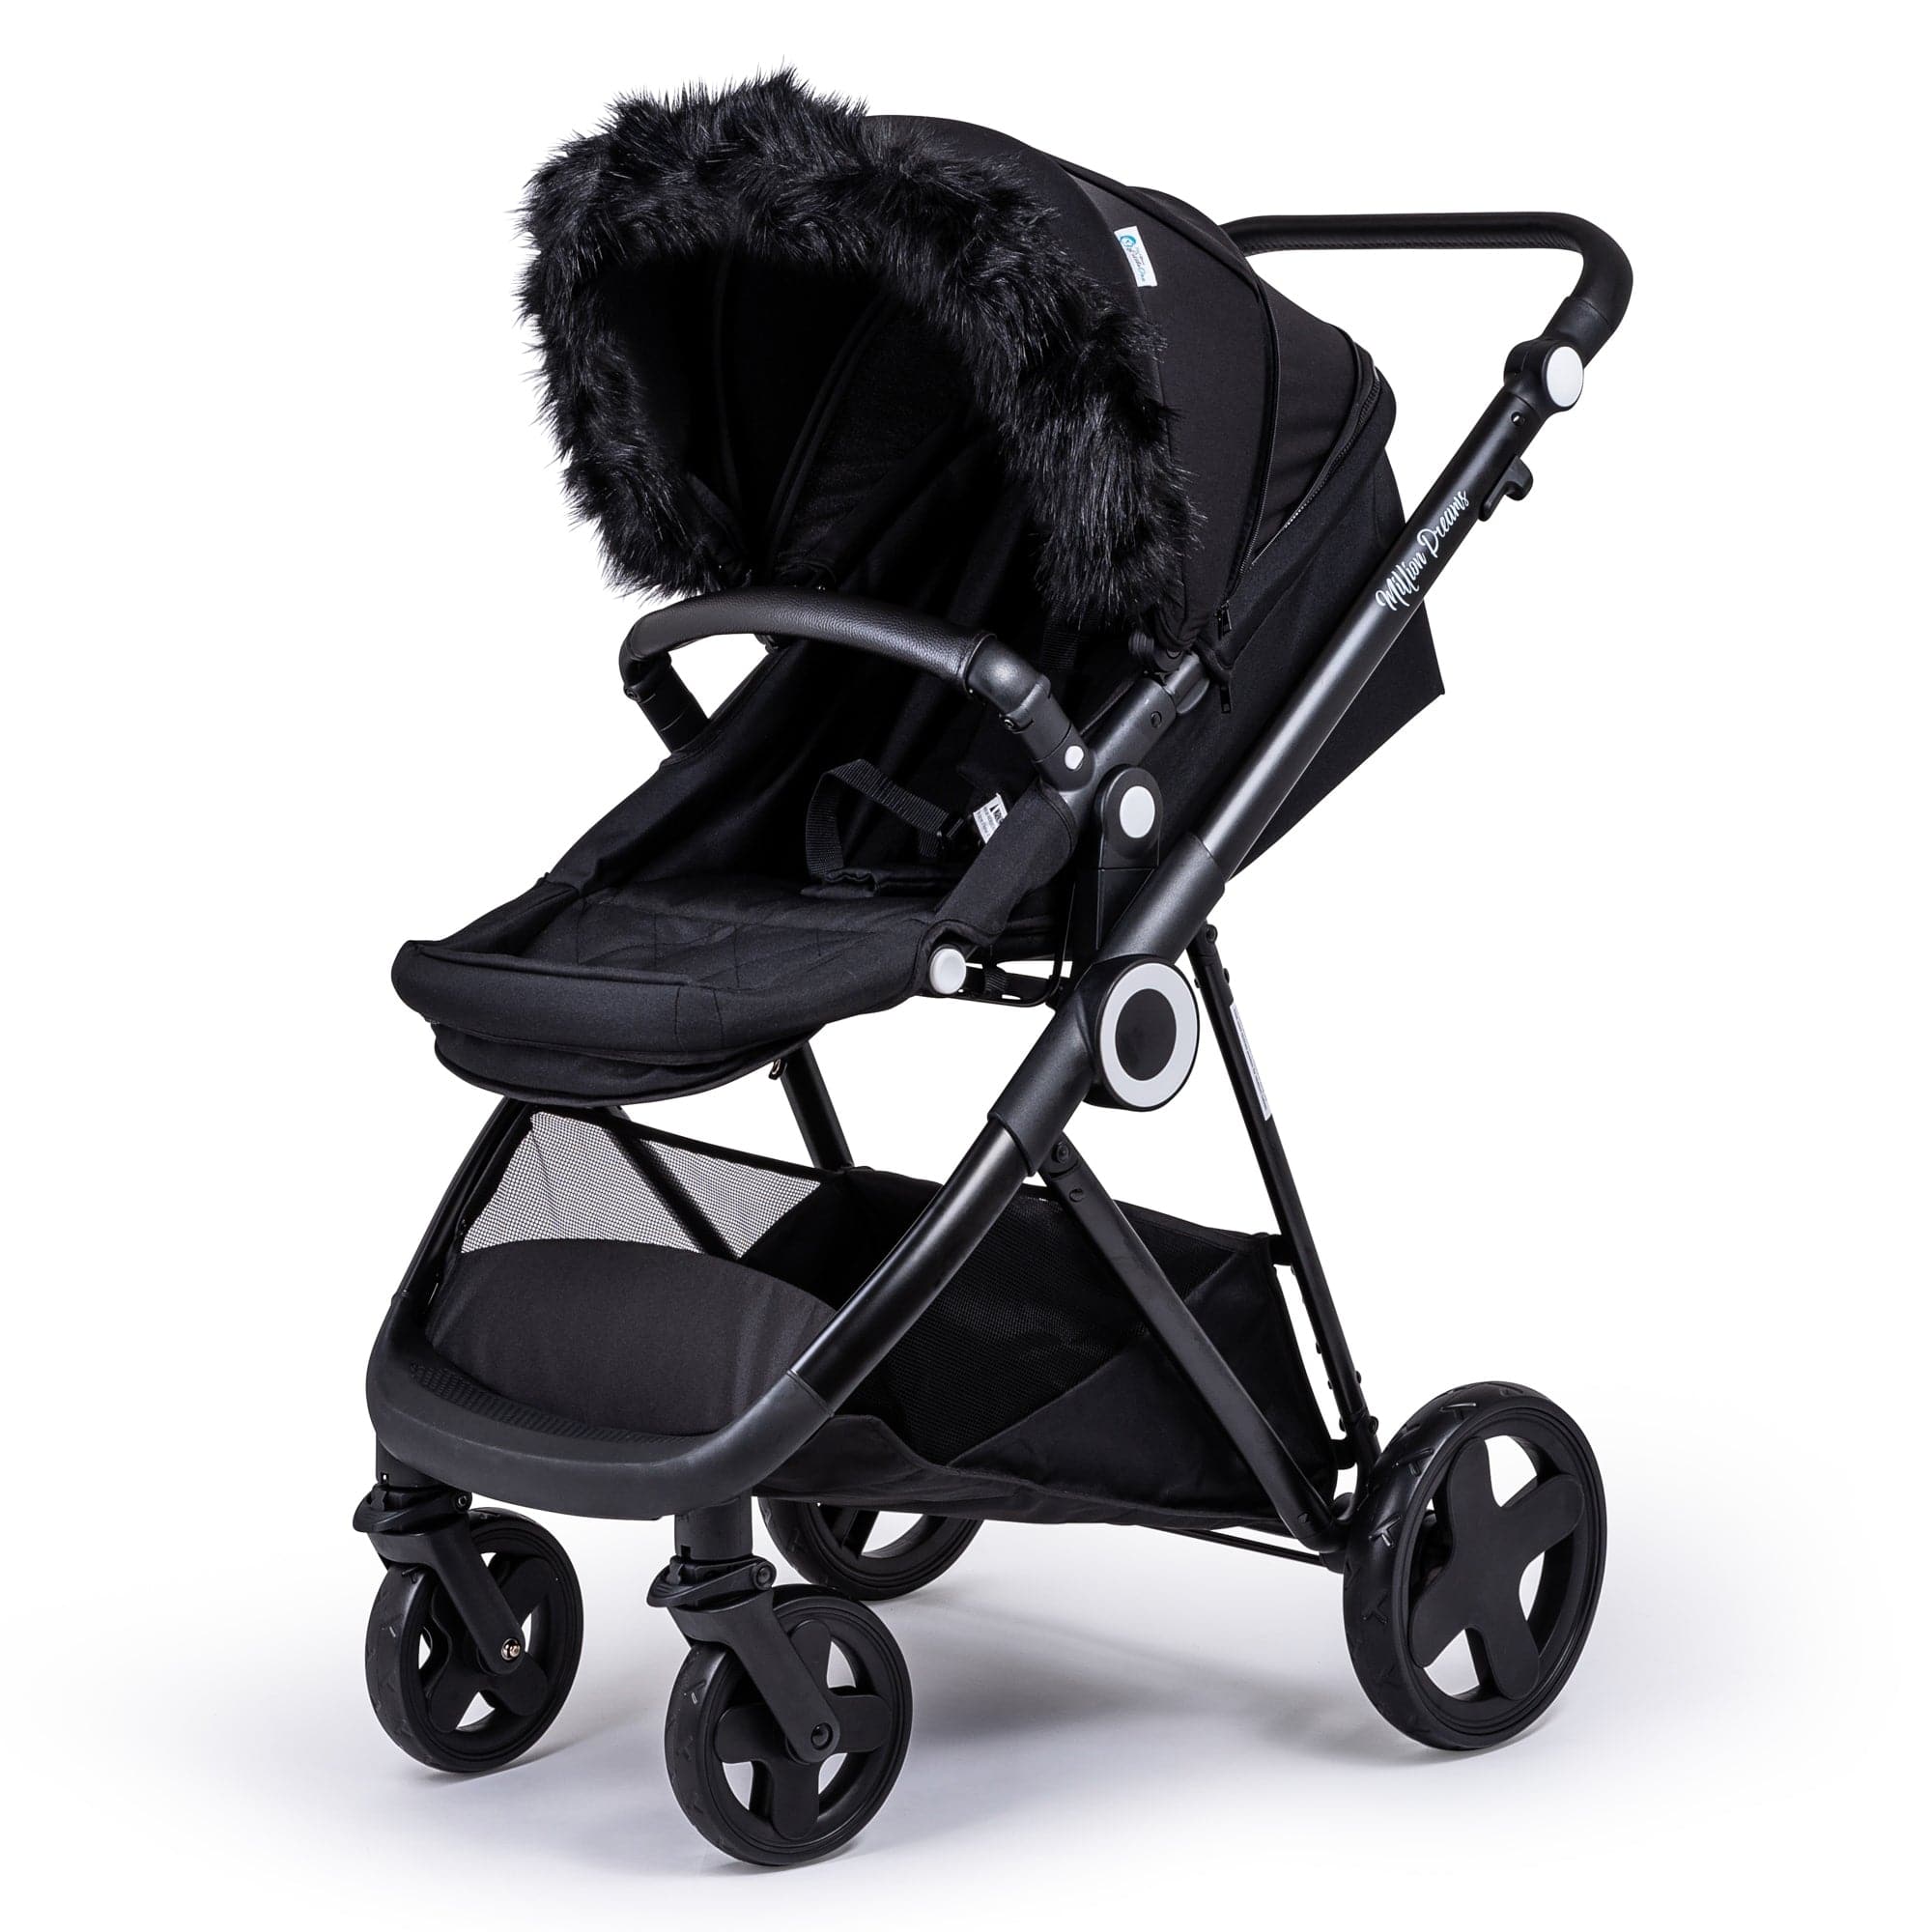 Pram Fur Hood Trim Attachment For Pushchair Compatible with Gb - Black / Fits All Models | For Your Little One